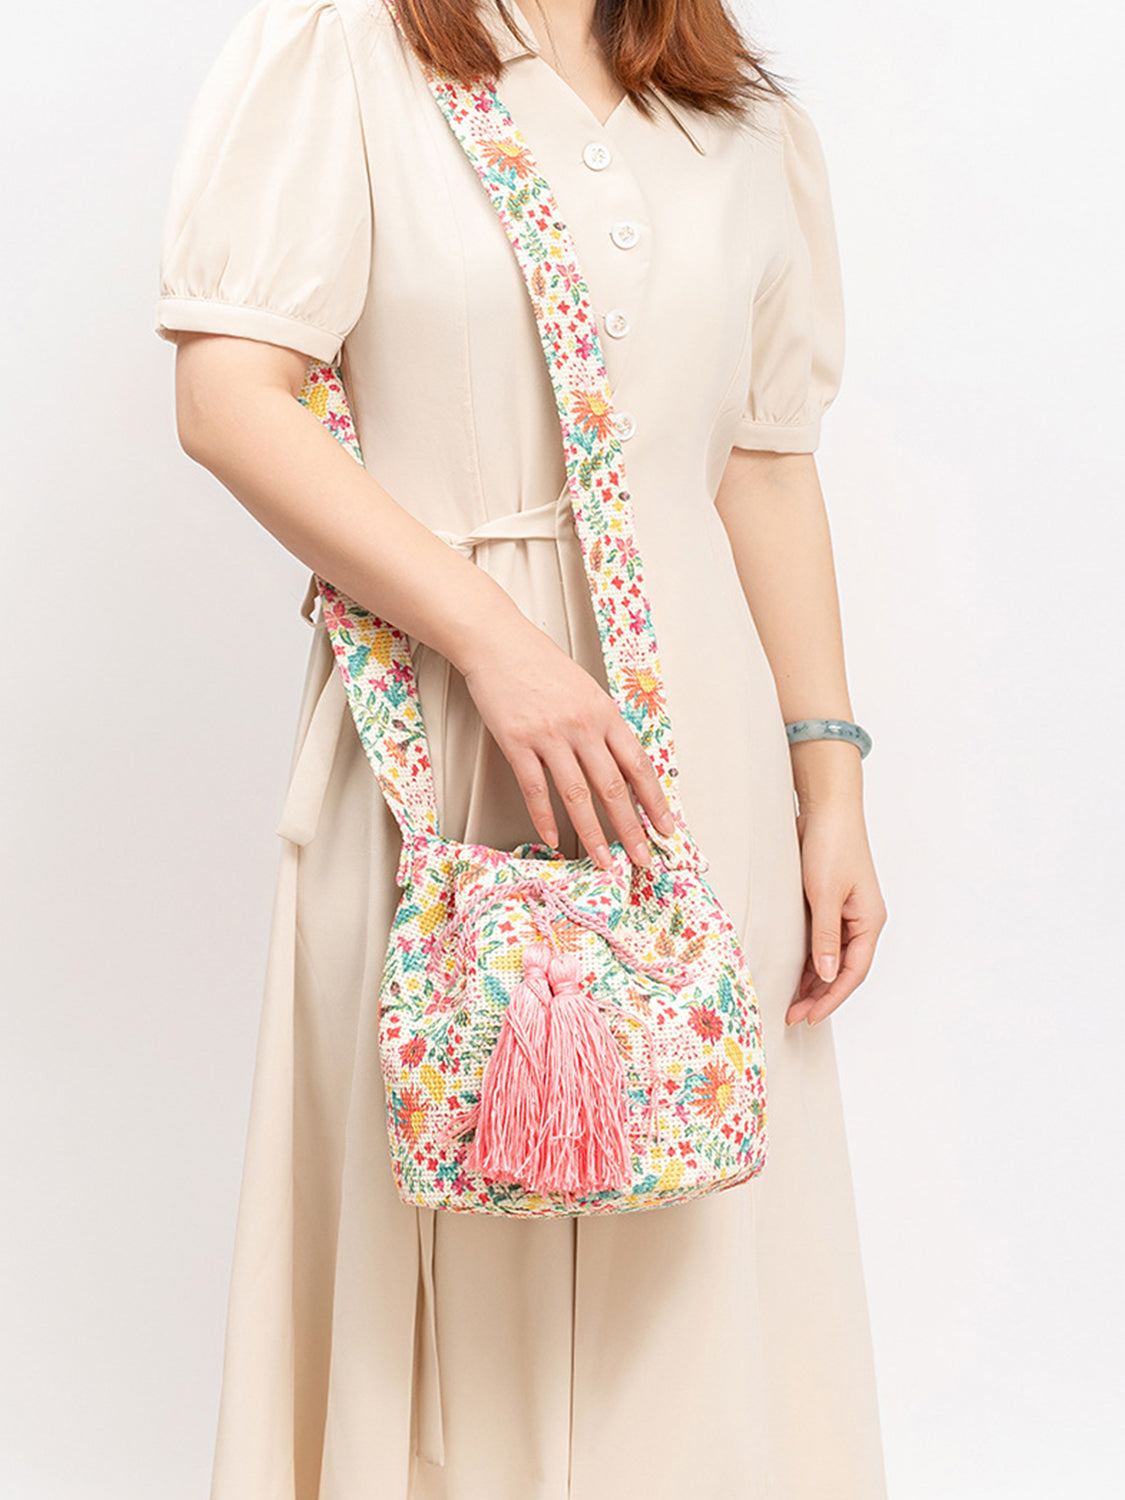 Pink tassel bucket bag with intricate floral patterns.